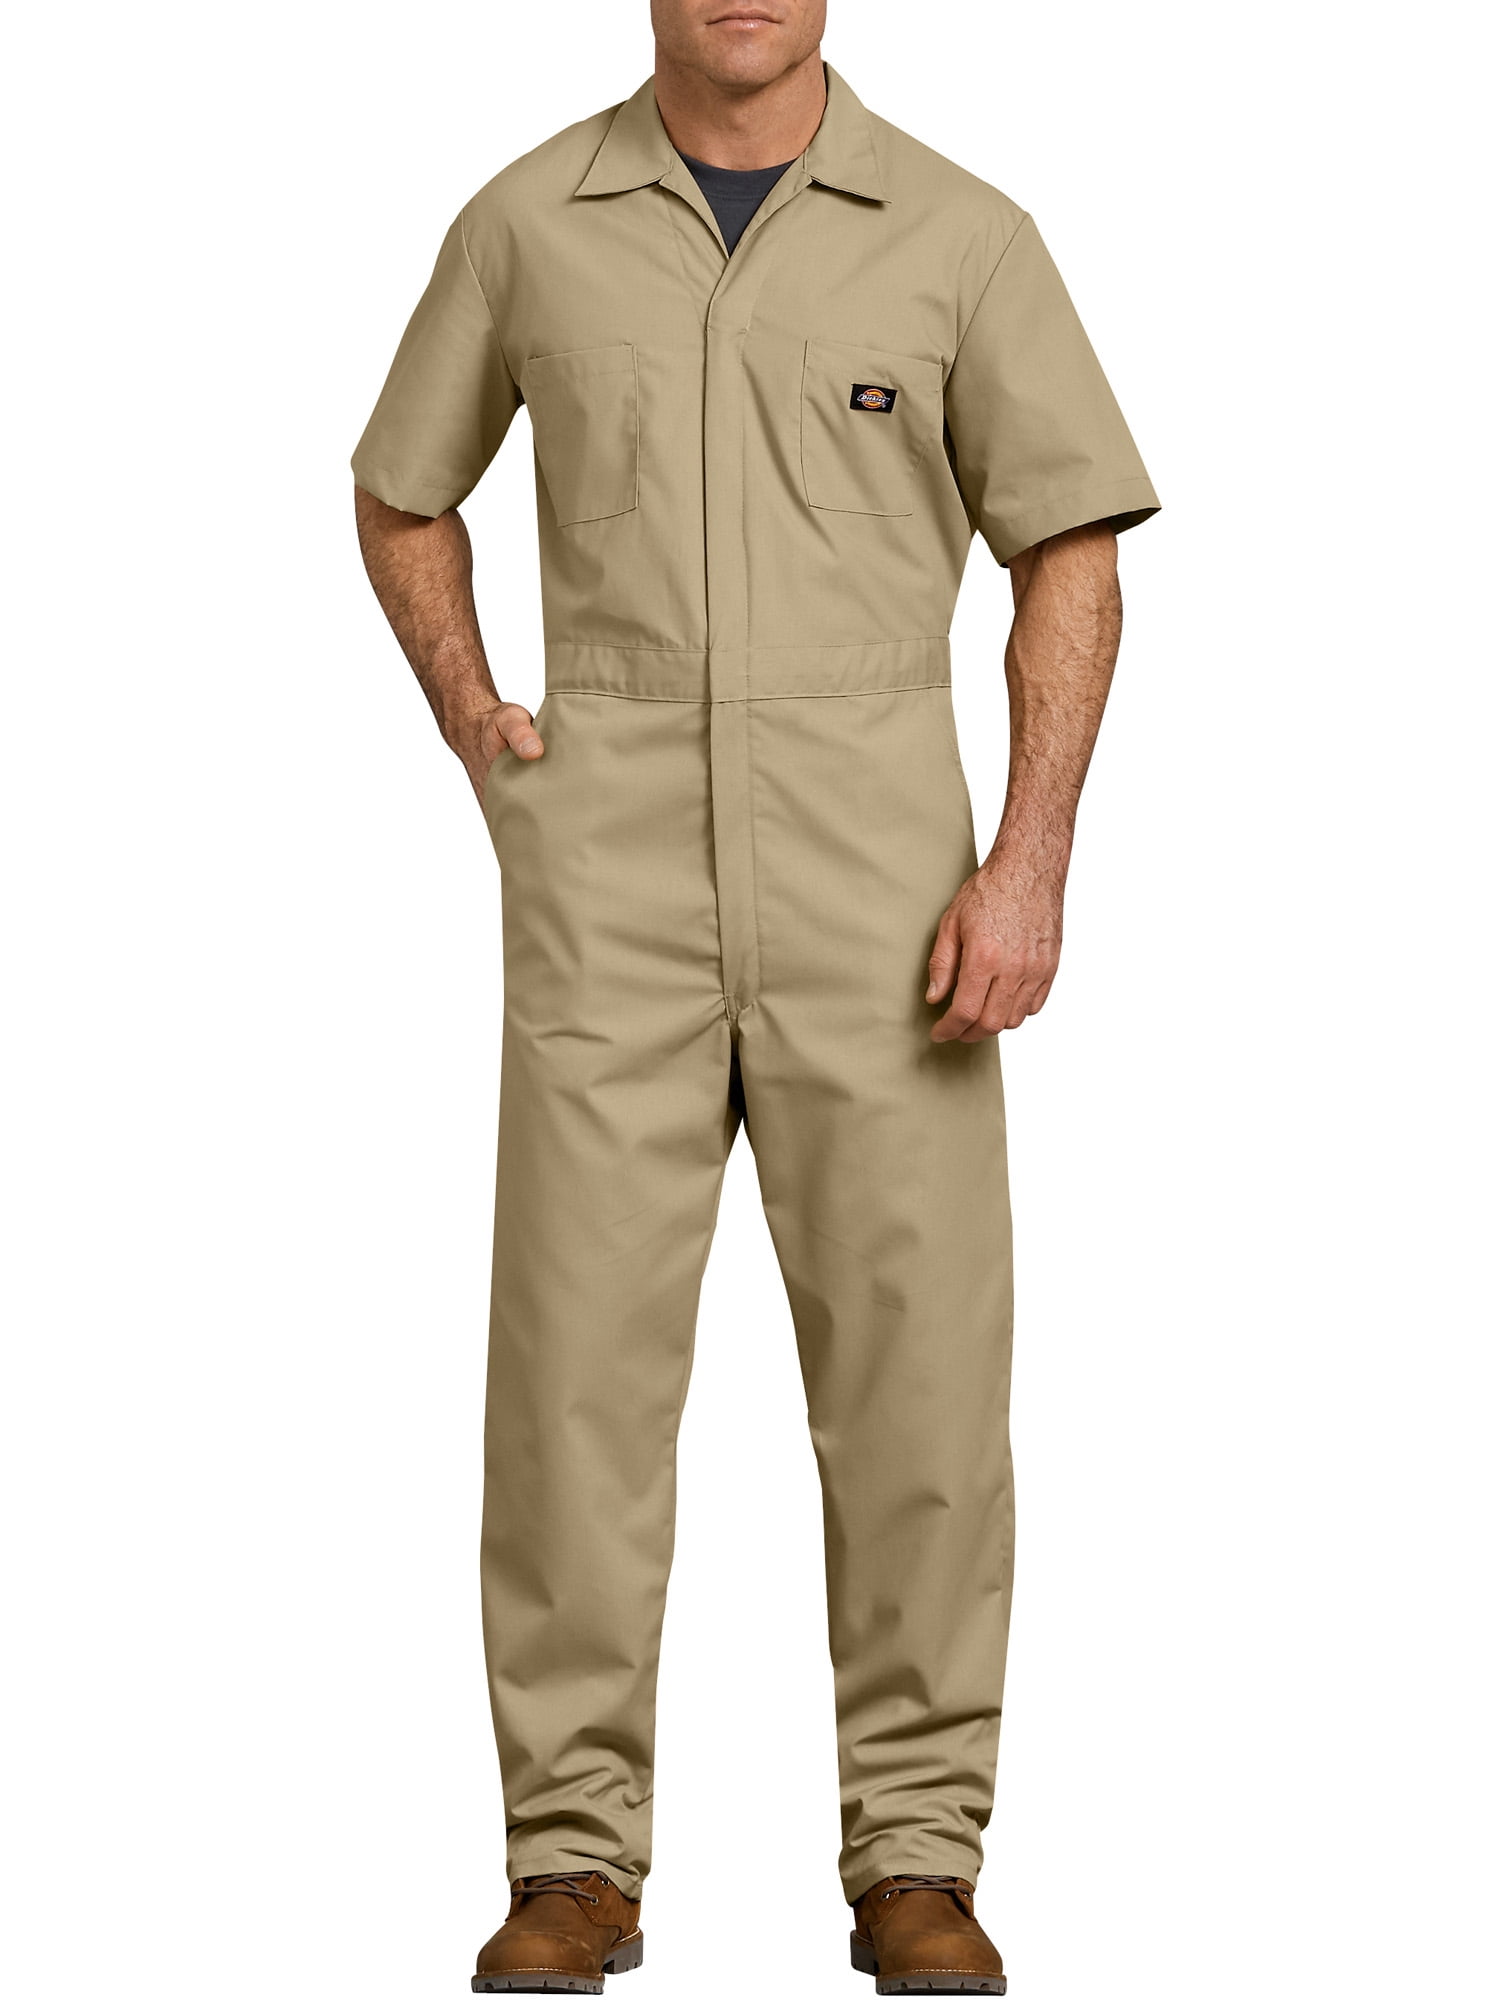 Dickies 33999 Short Sleeve Coveralls Coverall Black Red Navy Blue Khaki Grey 